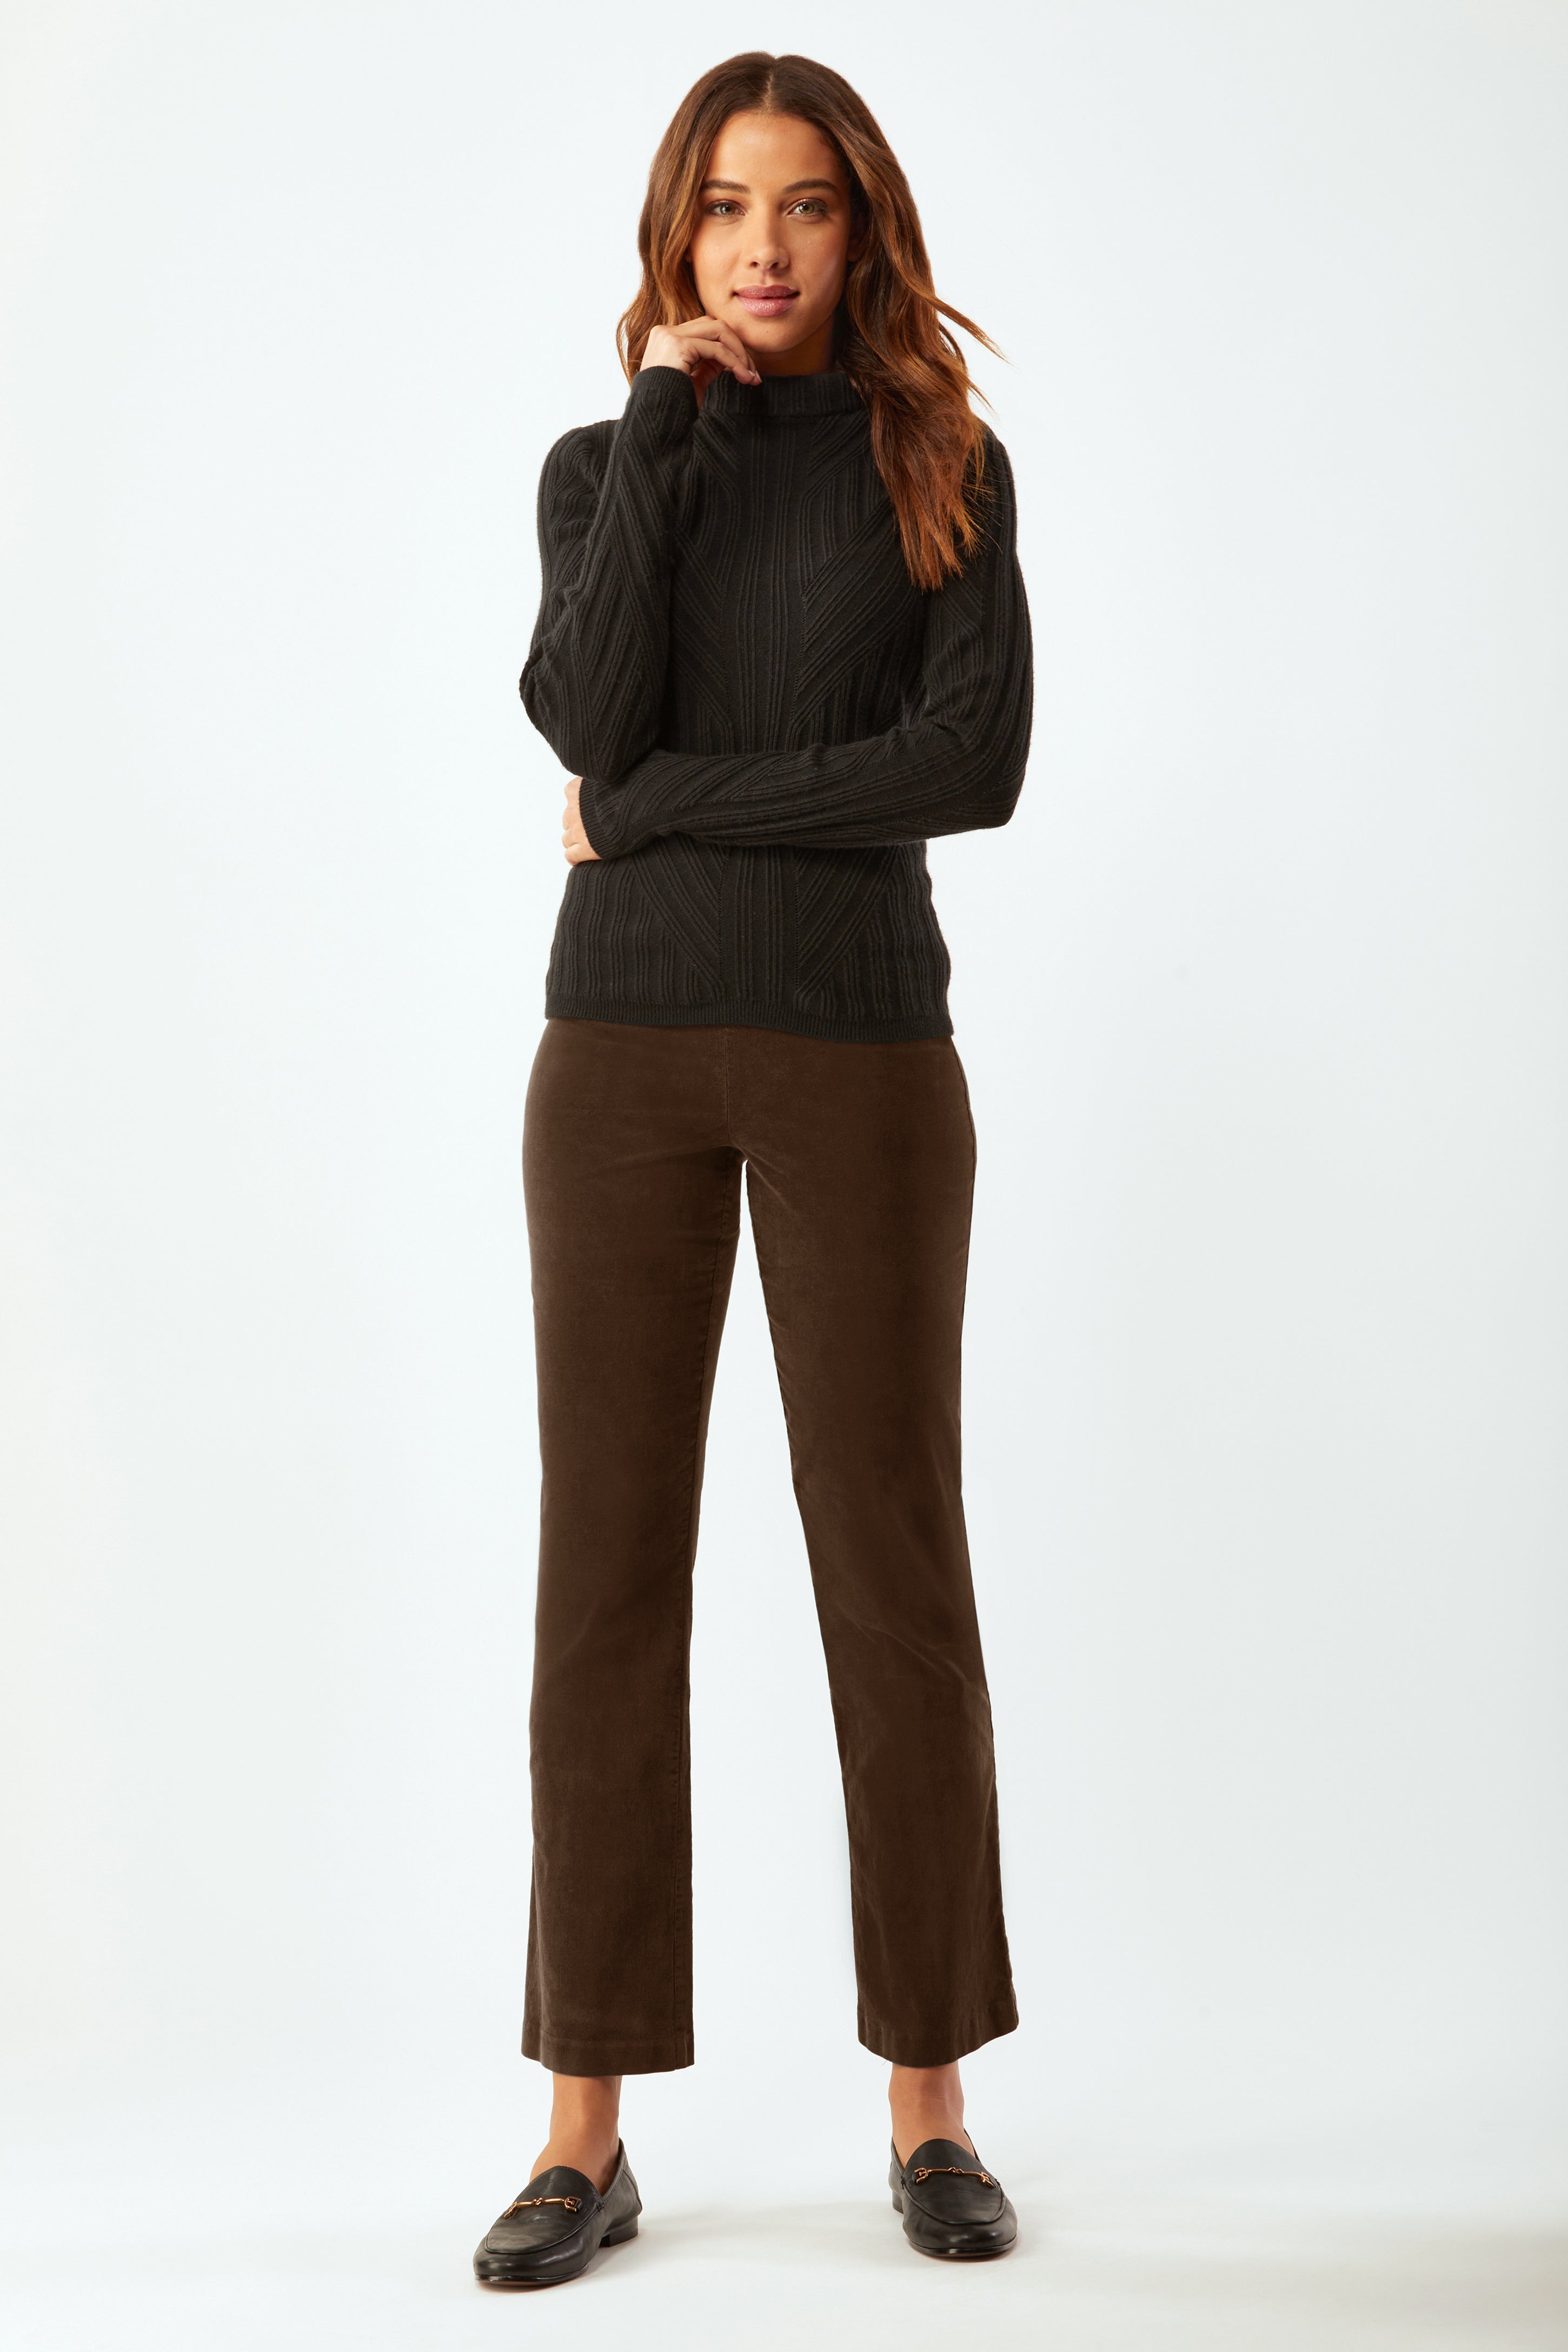 Image of Prince Cropped Flare Pant in Corduroy - Chocolate